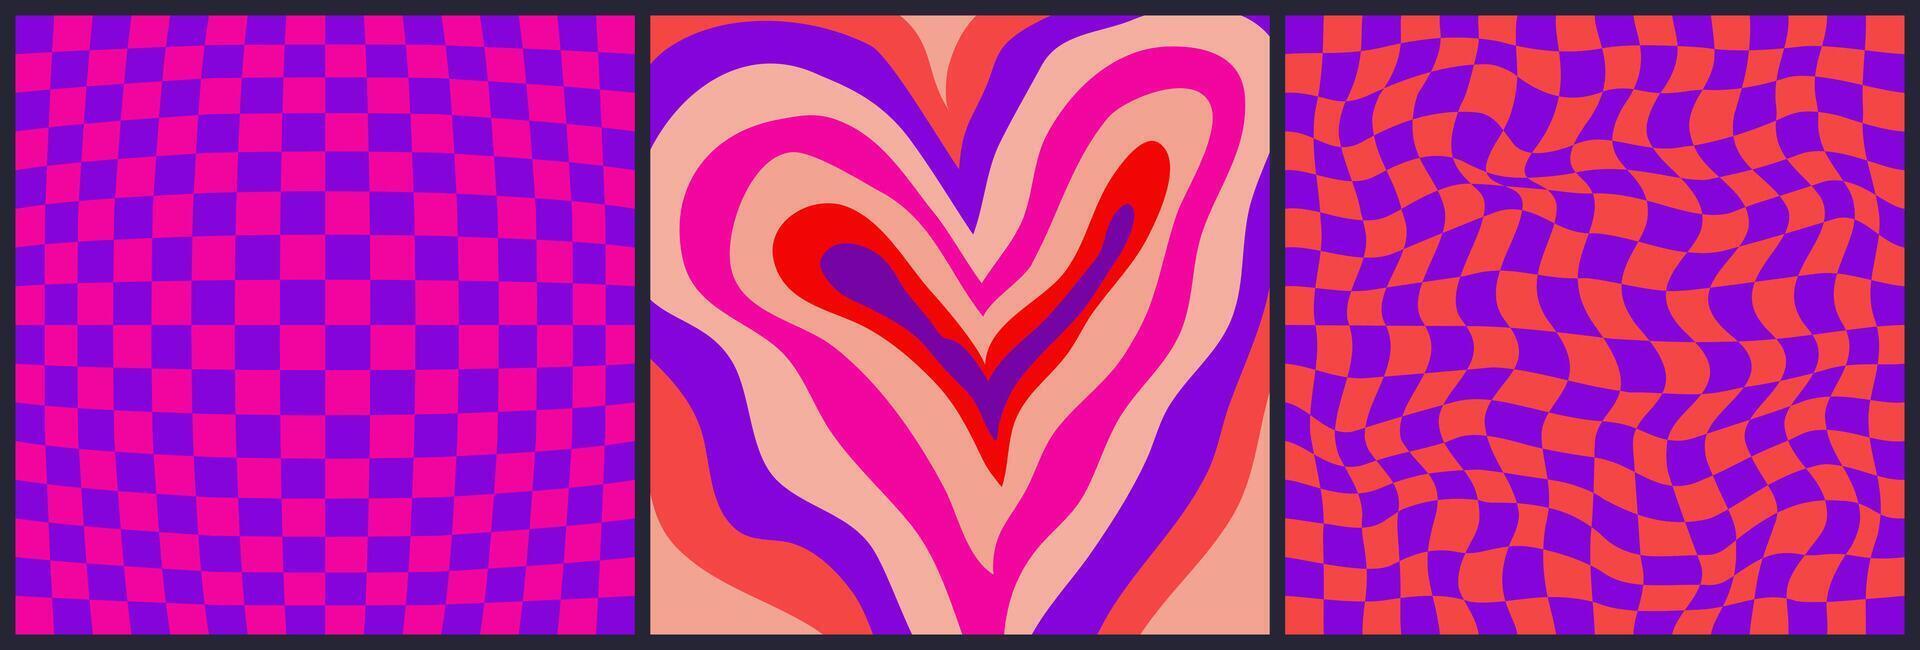 Psychedelic Heart set background. Valentines heart with checkerboard pattern. Abstract design poster retro love. Vector illustration